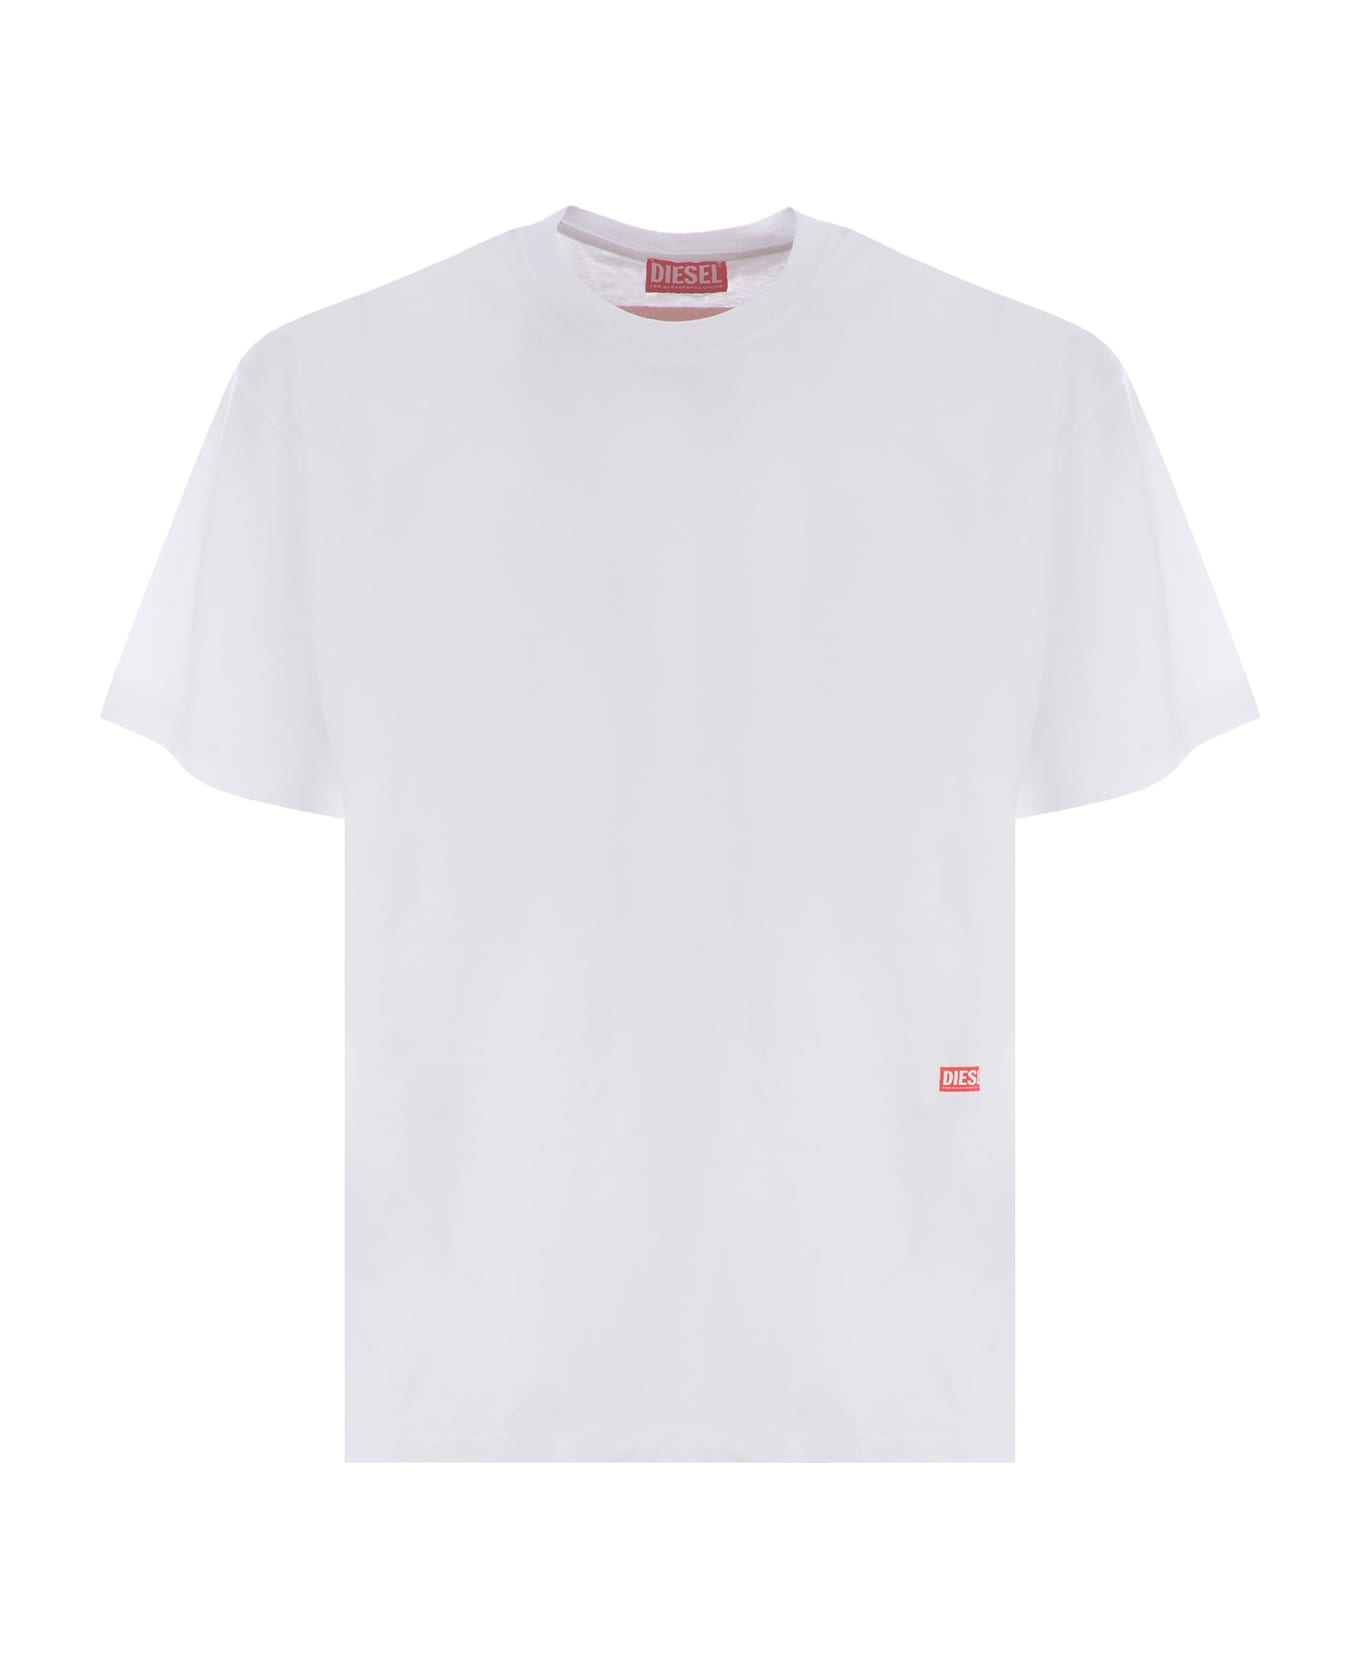 Diesel T-shirt Diesel "t-boxt-n11" Made Of Cotton Jersey - Bianco